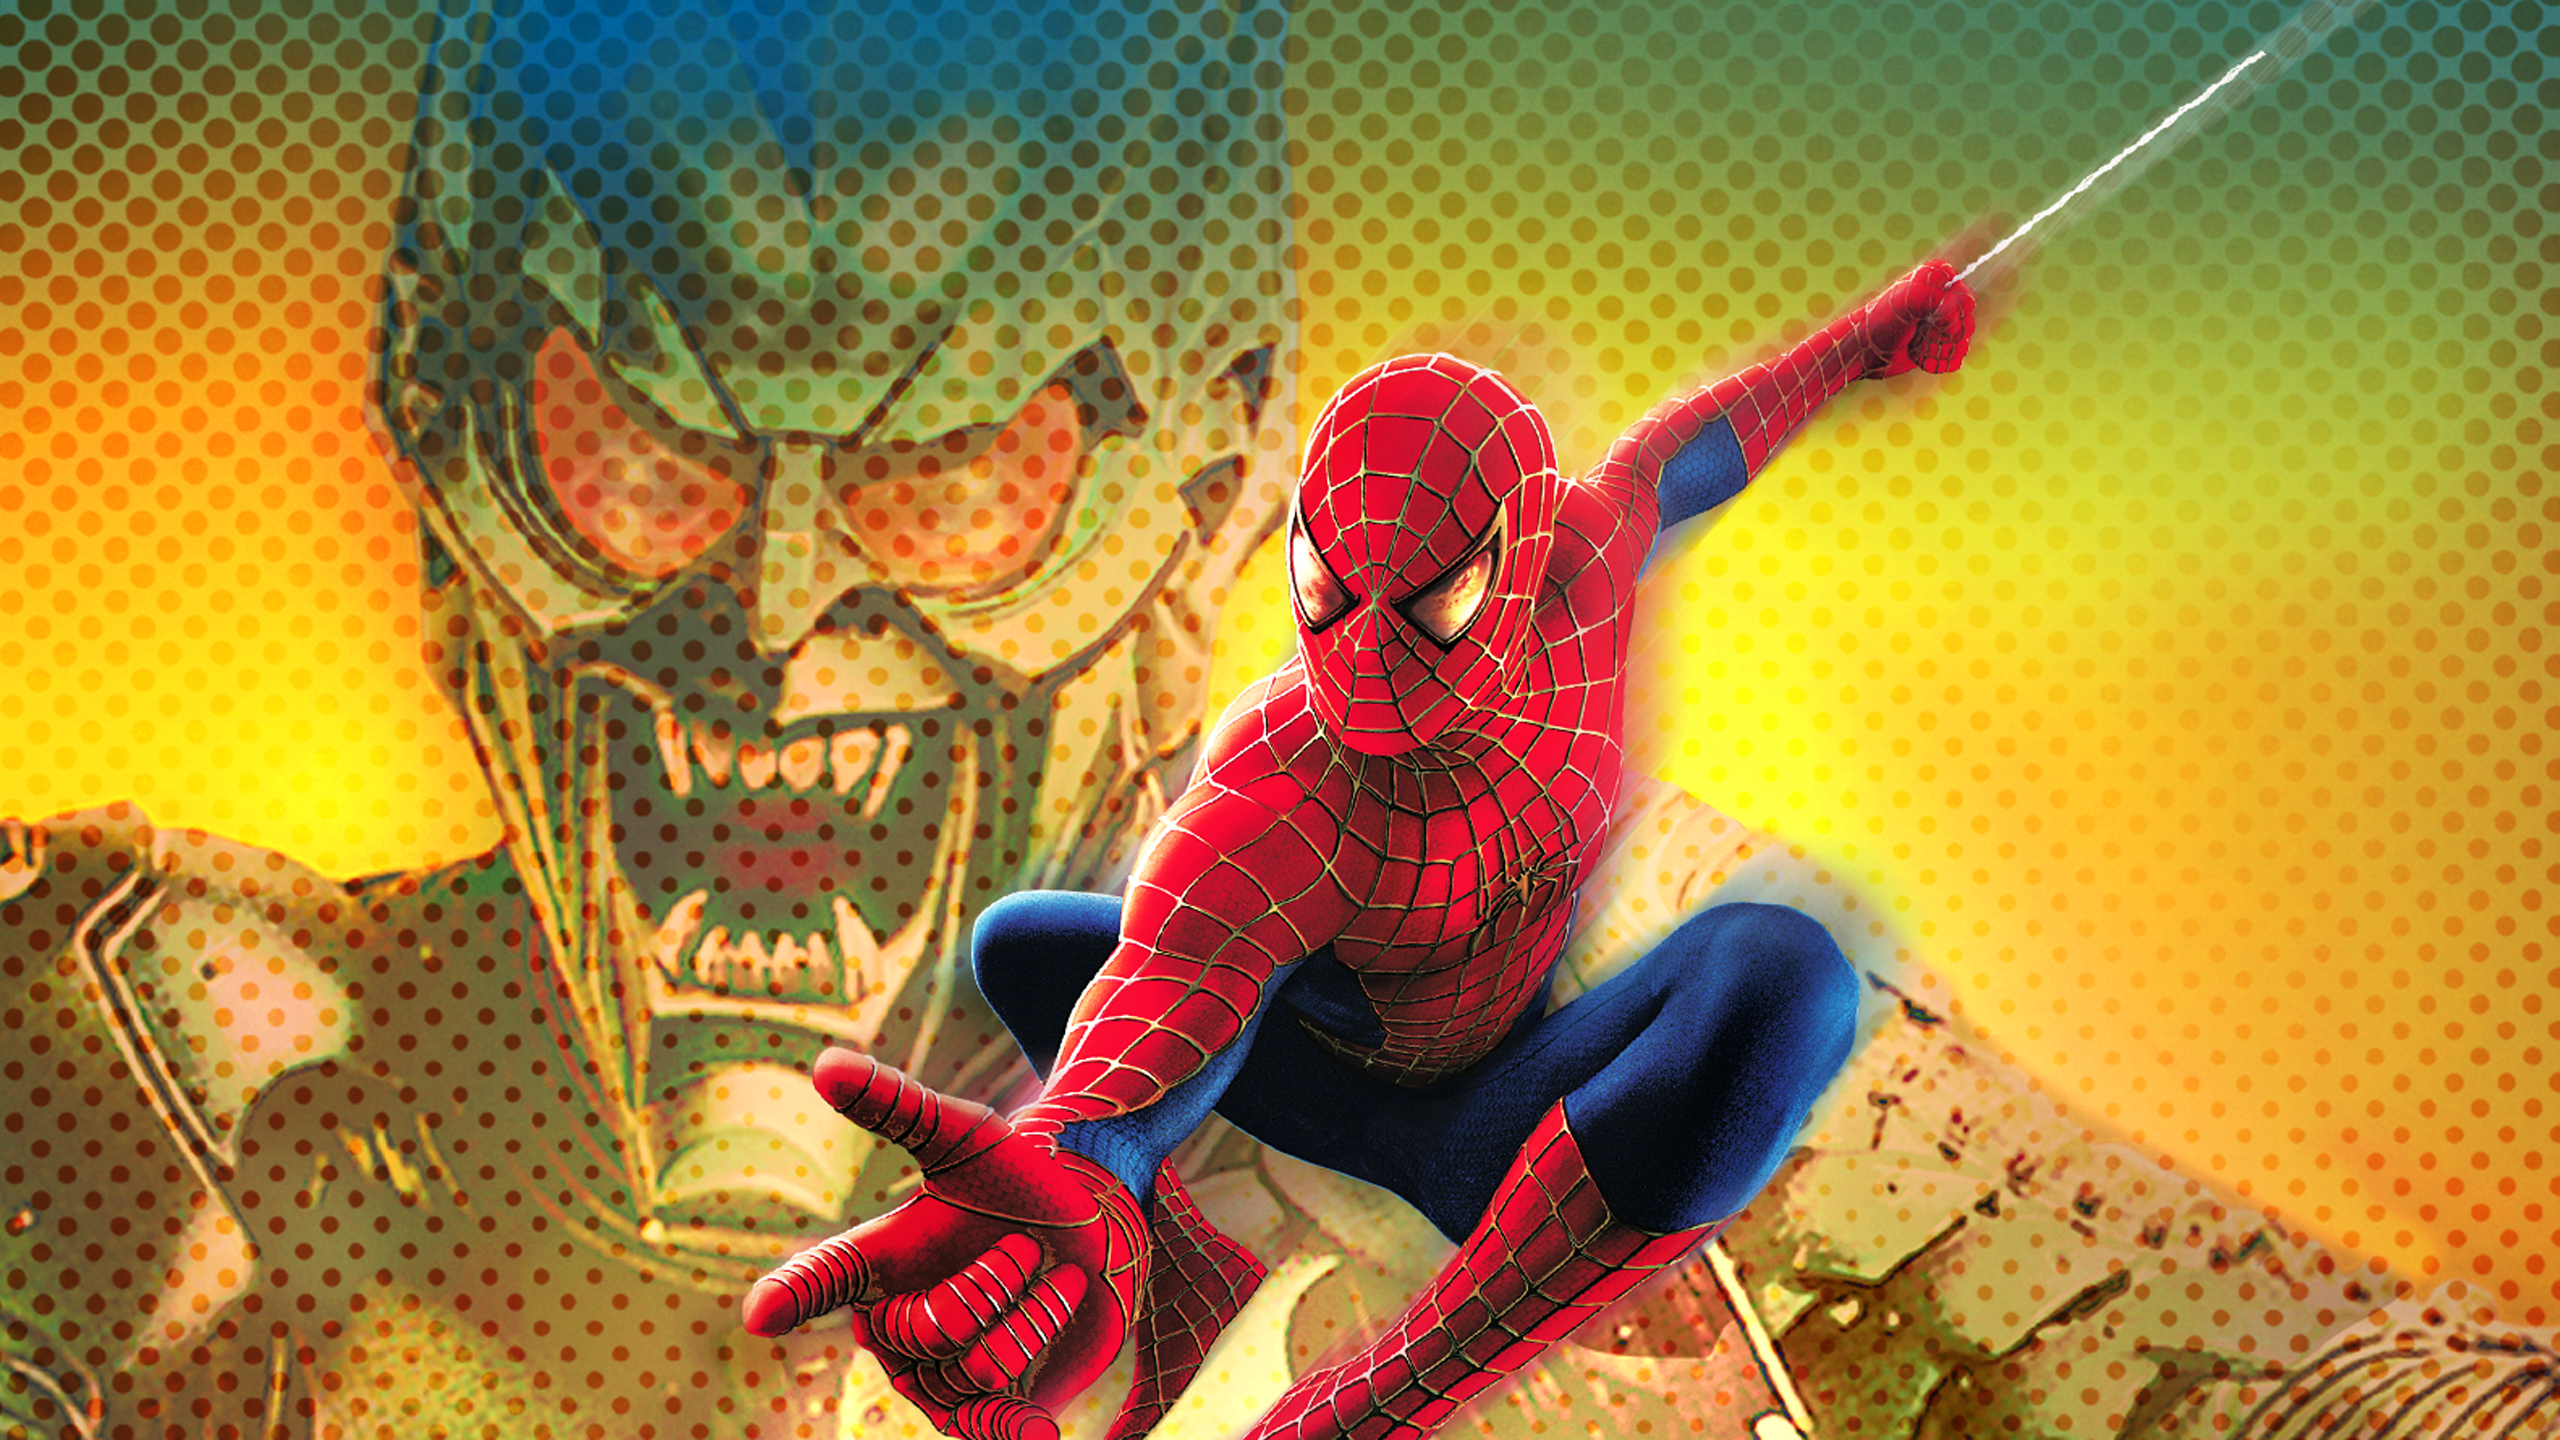 The Amazing Spider-Man (2012) MP3 - Download The Amazing Spider-Man (2012)  Soundtracks for FREE!